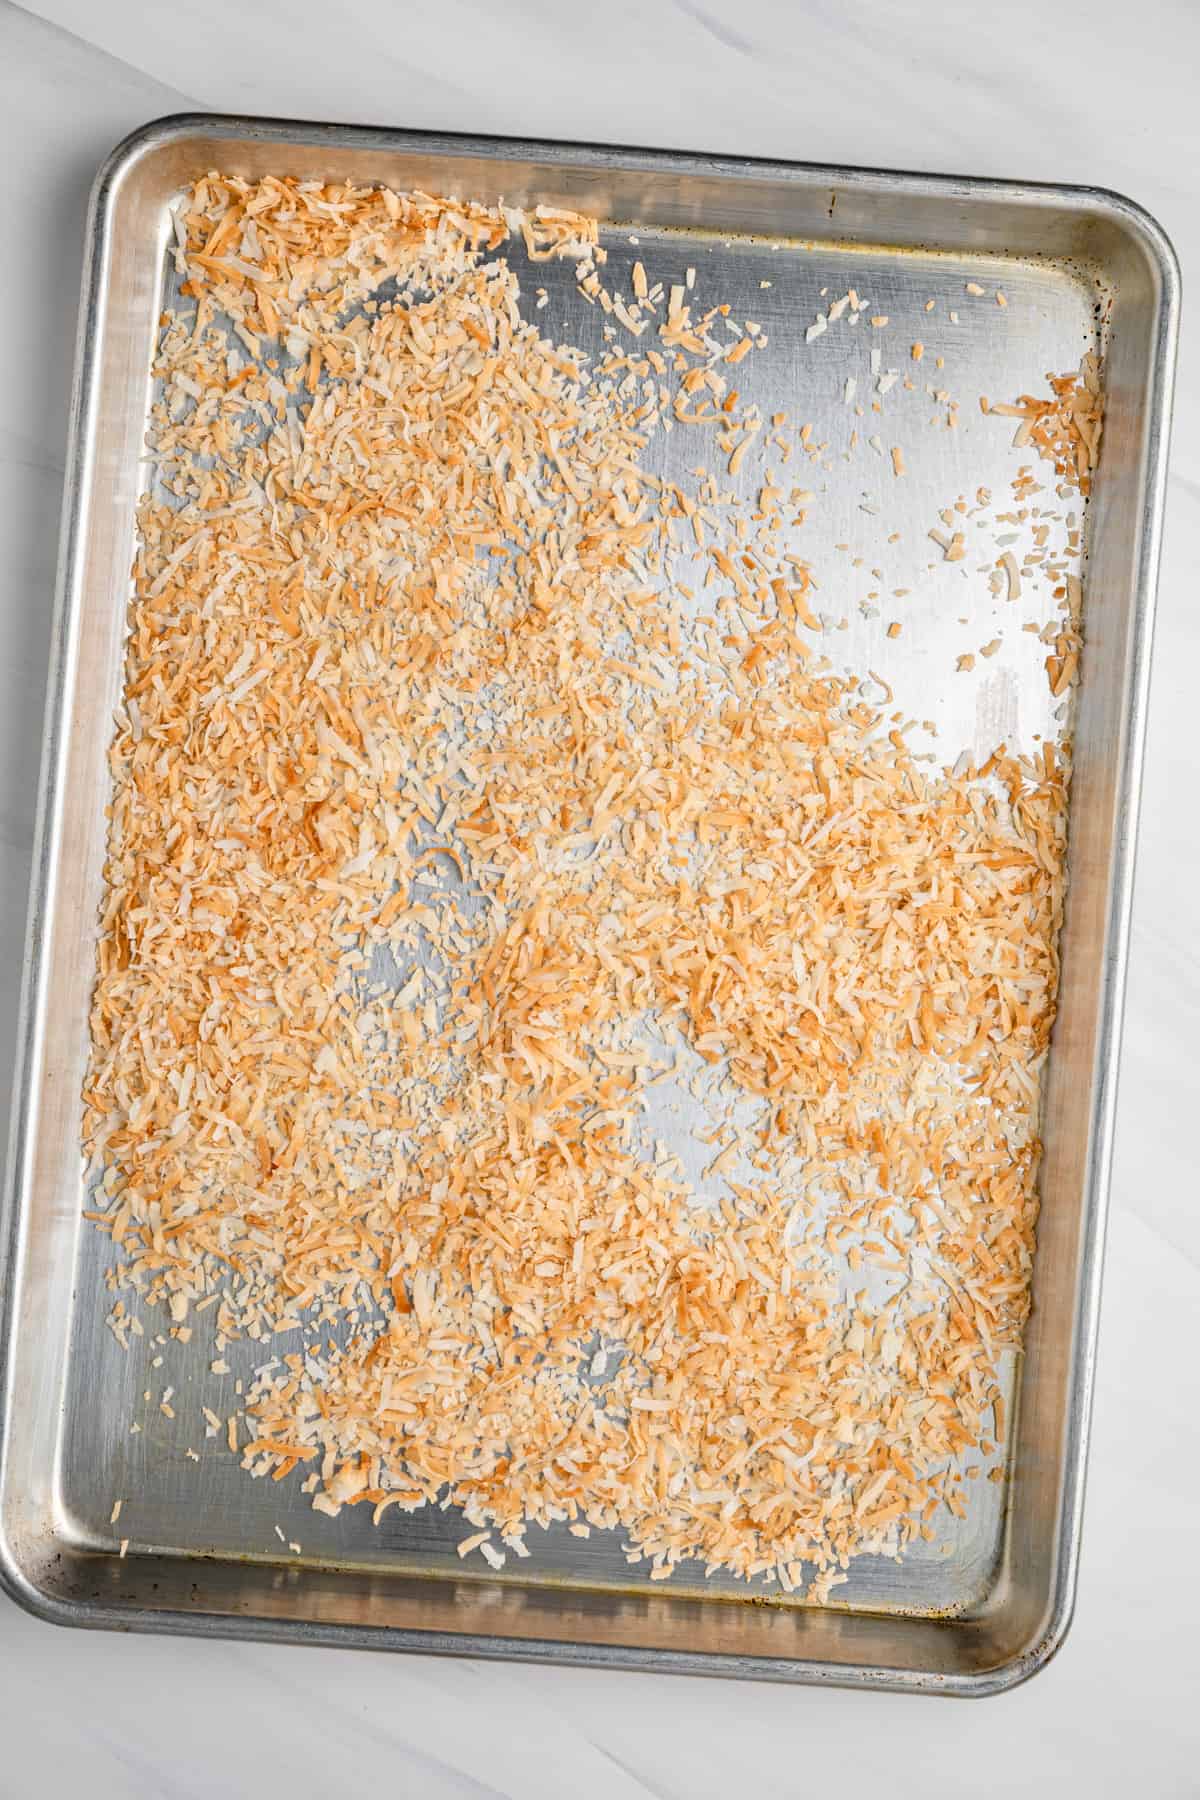 Toasted coconut on a baking sheet